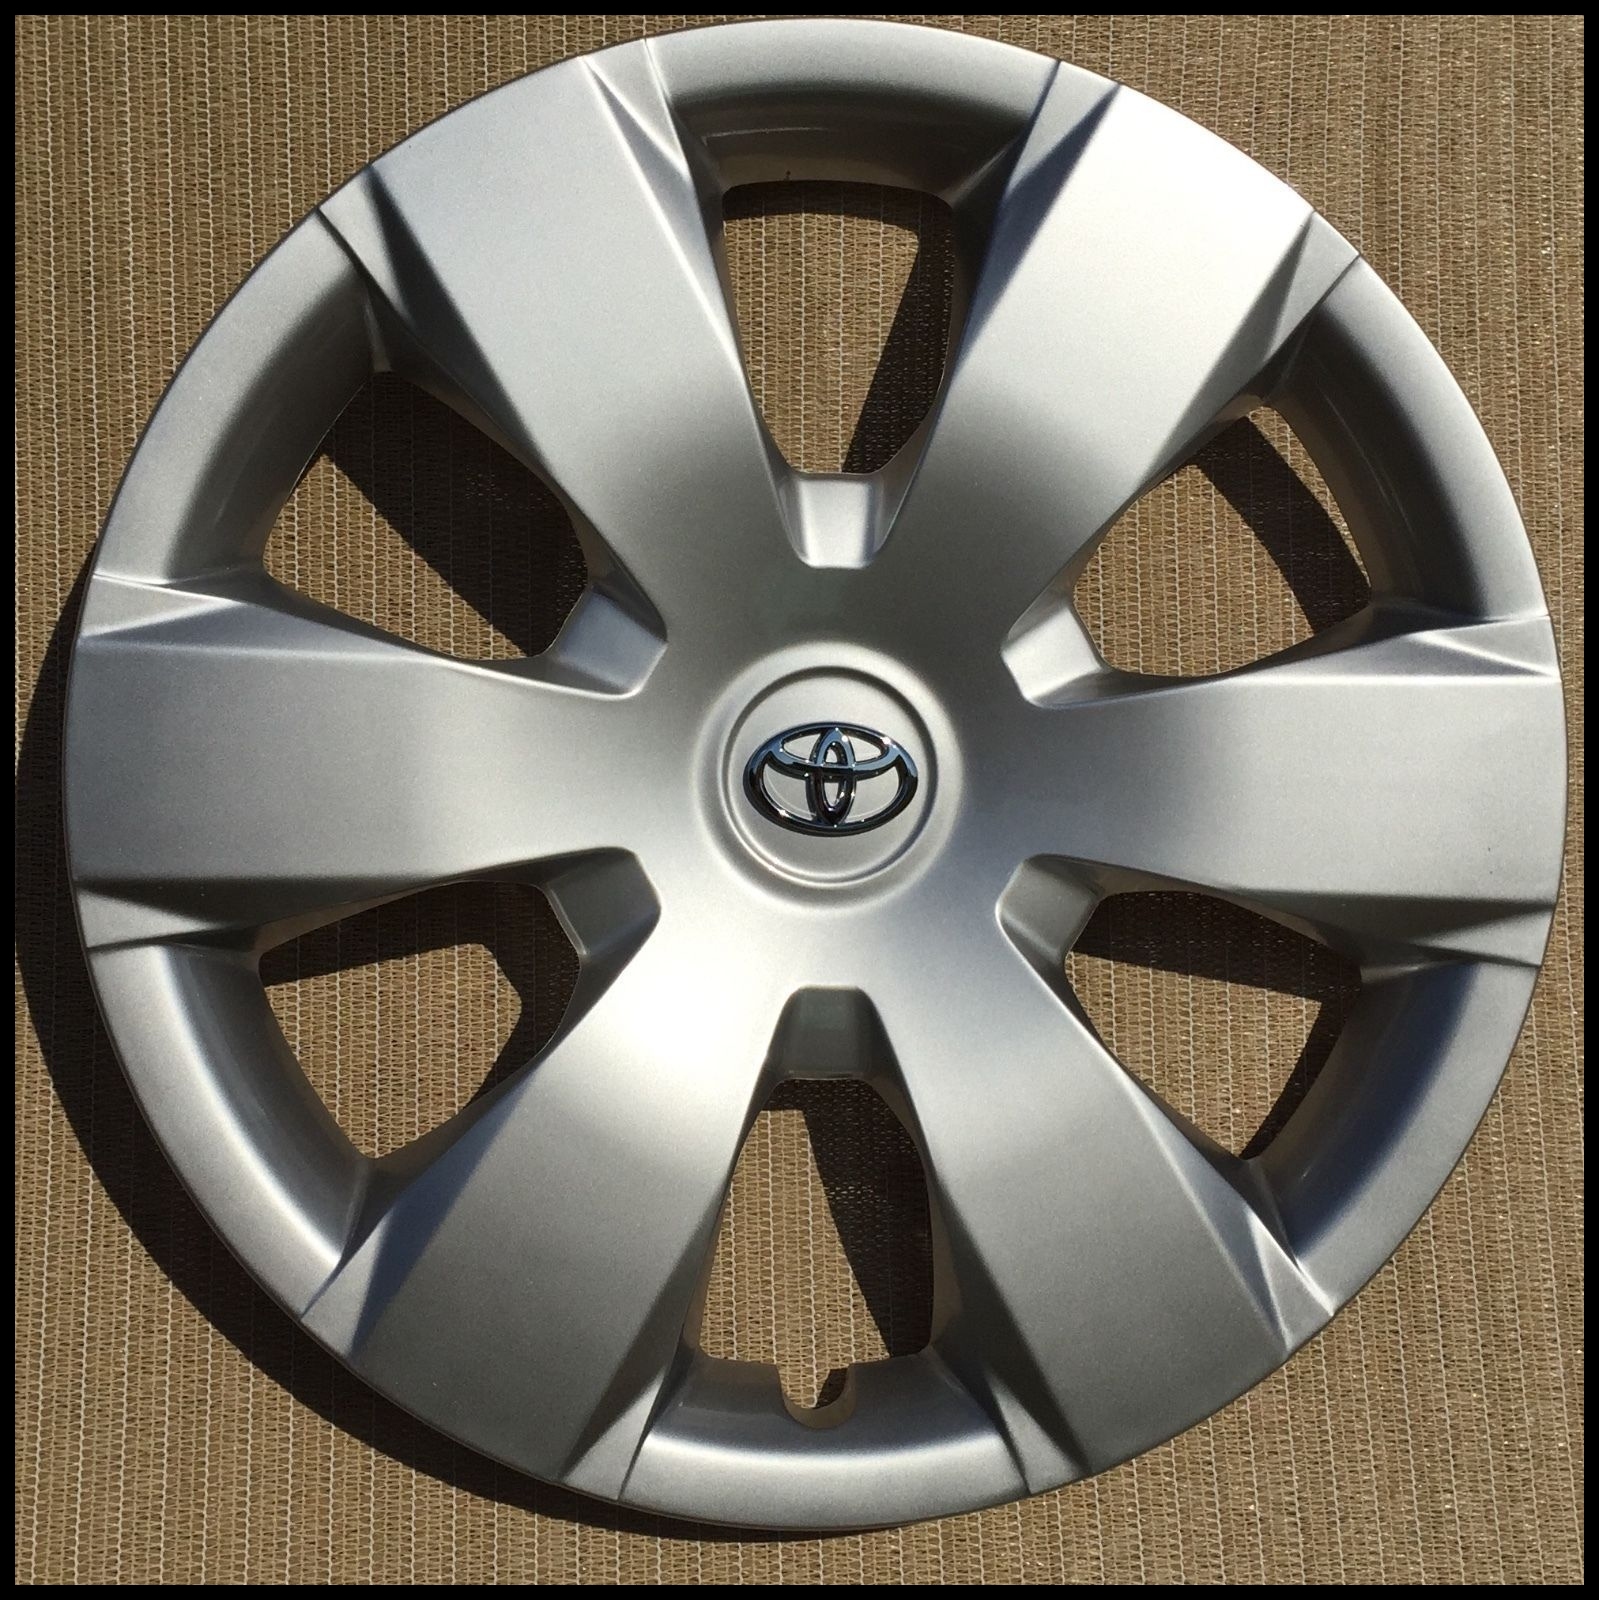 2006 toyota Camry Hubcaps Nice Awesome 16 Hubcap Wheelcover Fits 2007 2011 toyota Camry 2017